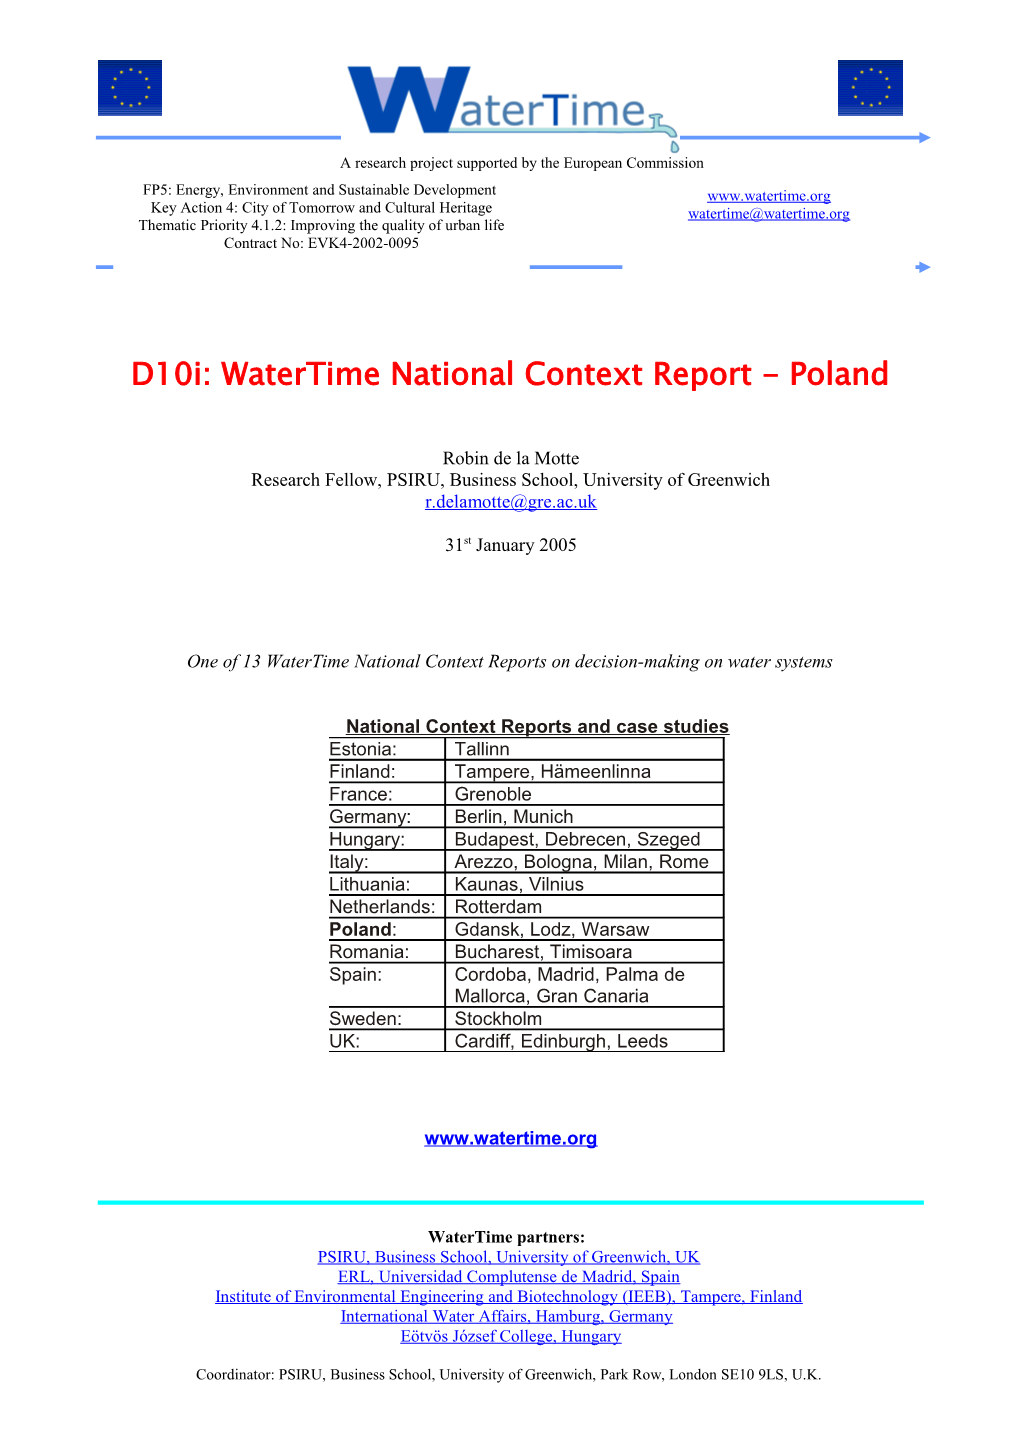 D10i: Watertime National Context Report - Poland